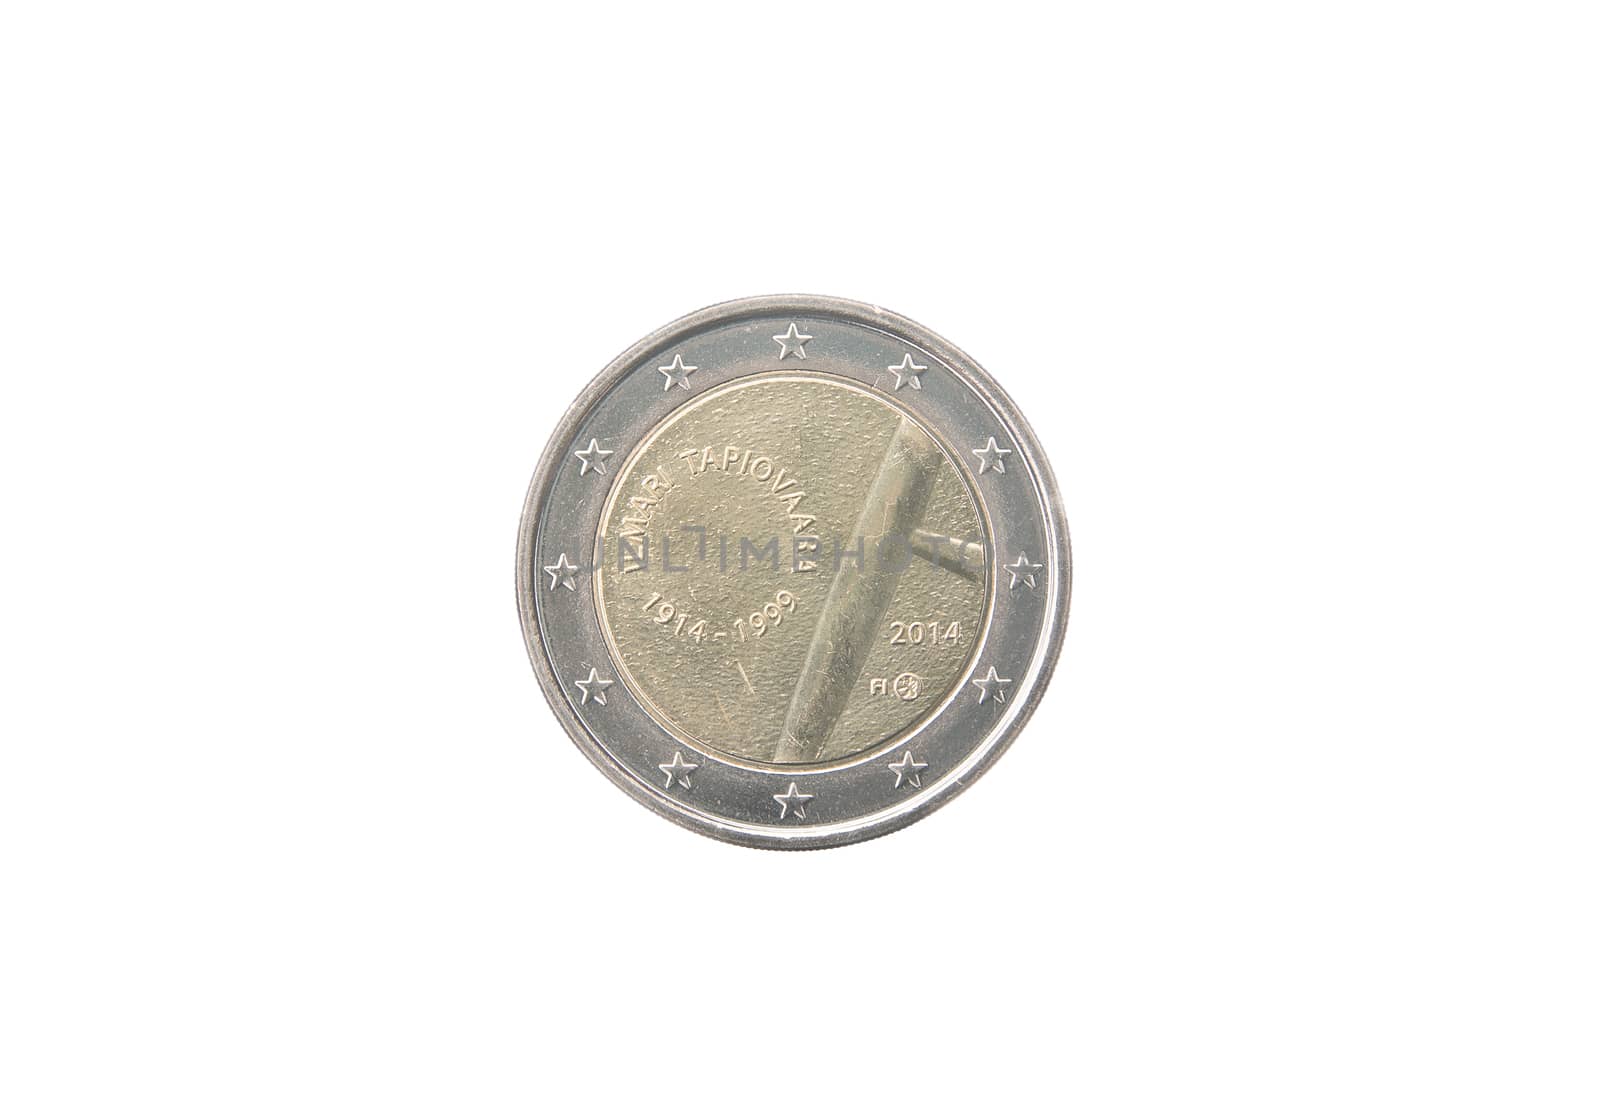 Commemorative 2 euro coin of Finland minted in 2014 isolated on white